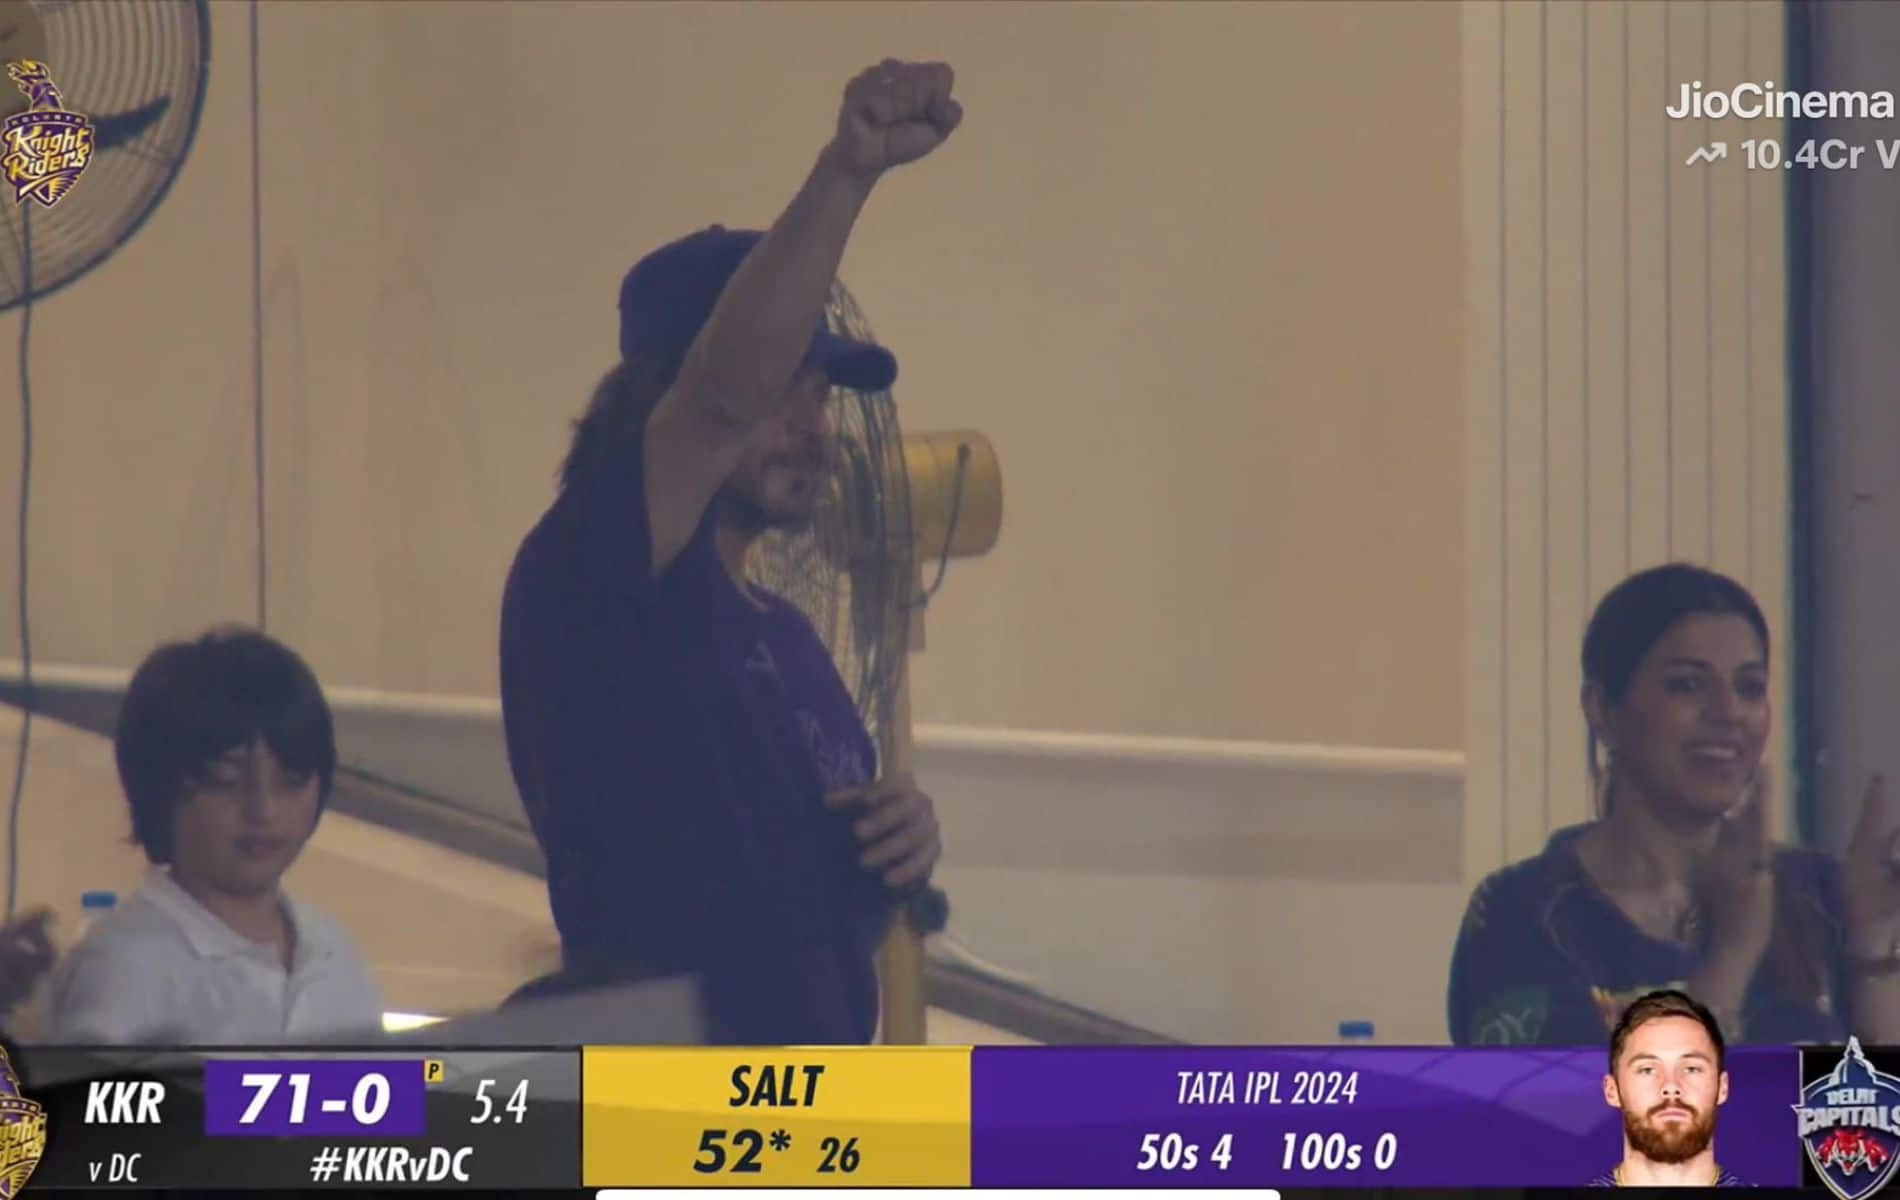 SRK has been the biggest supporter of KKR this season (x.com)